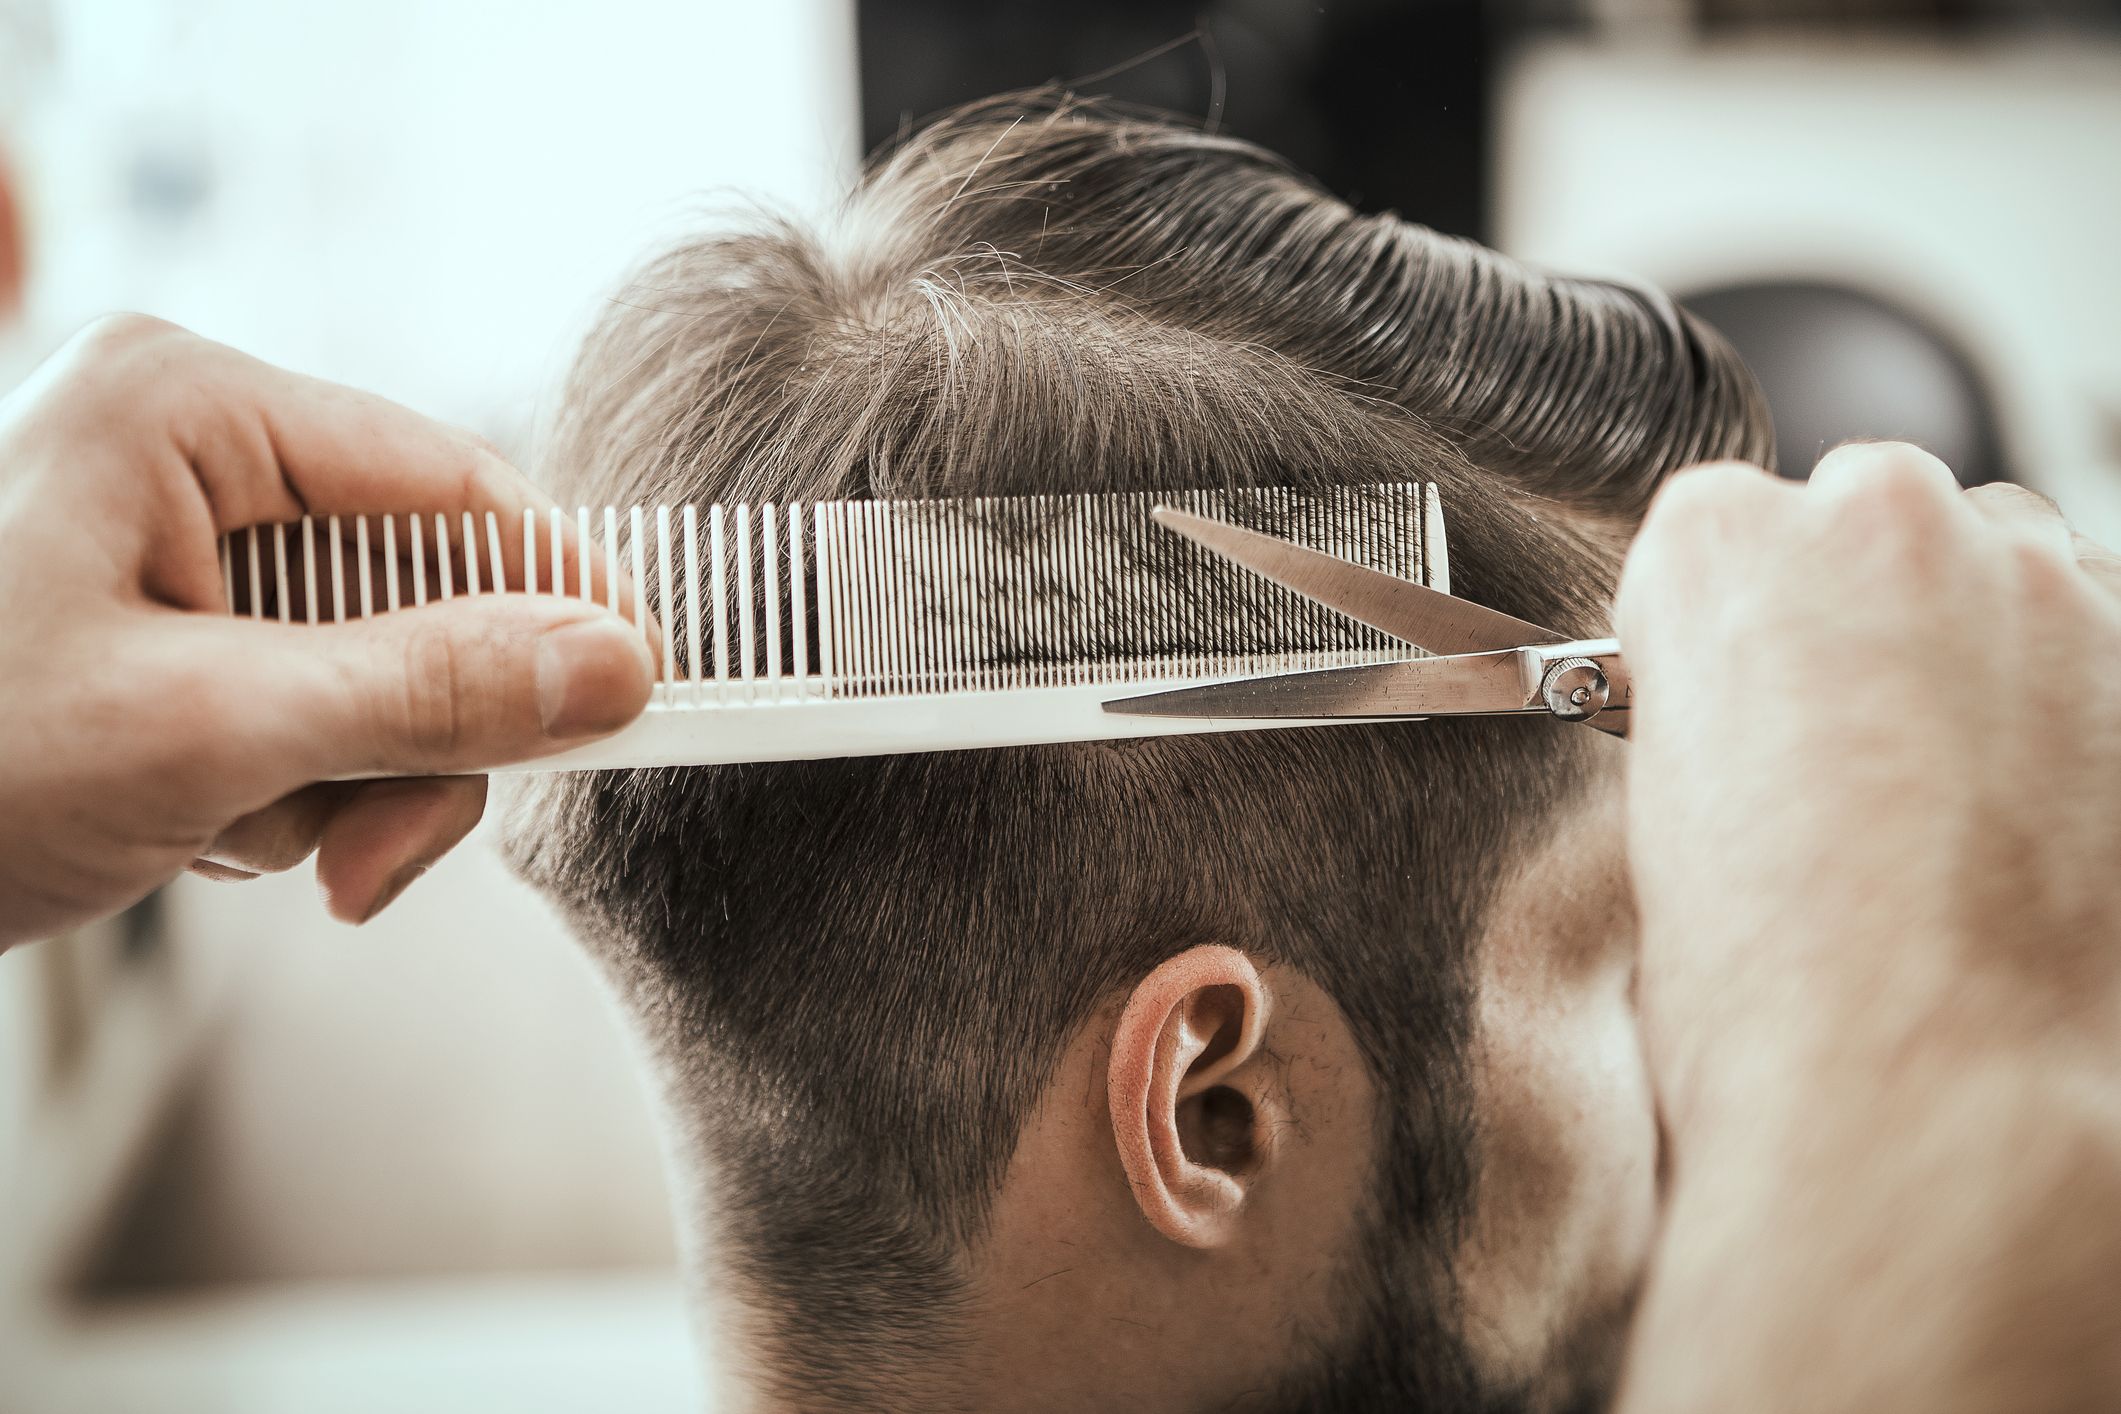 10 Ways to Cut Your Own Hair - How to Give Yourself a Haircut